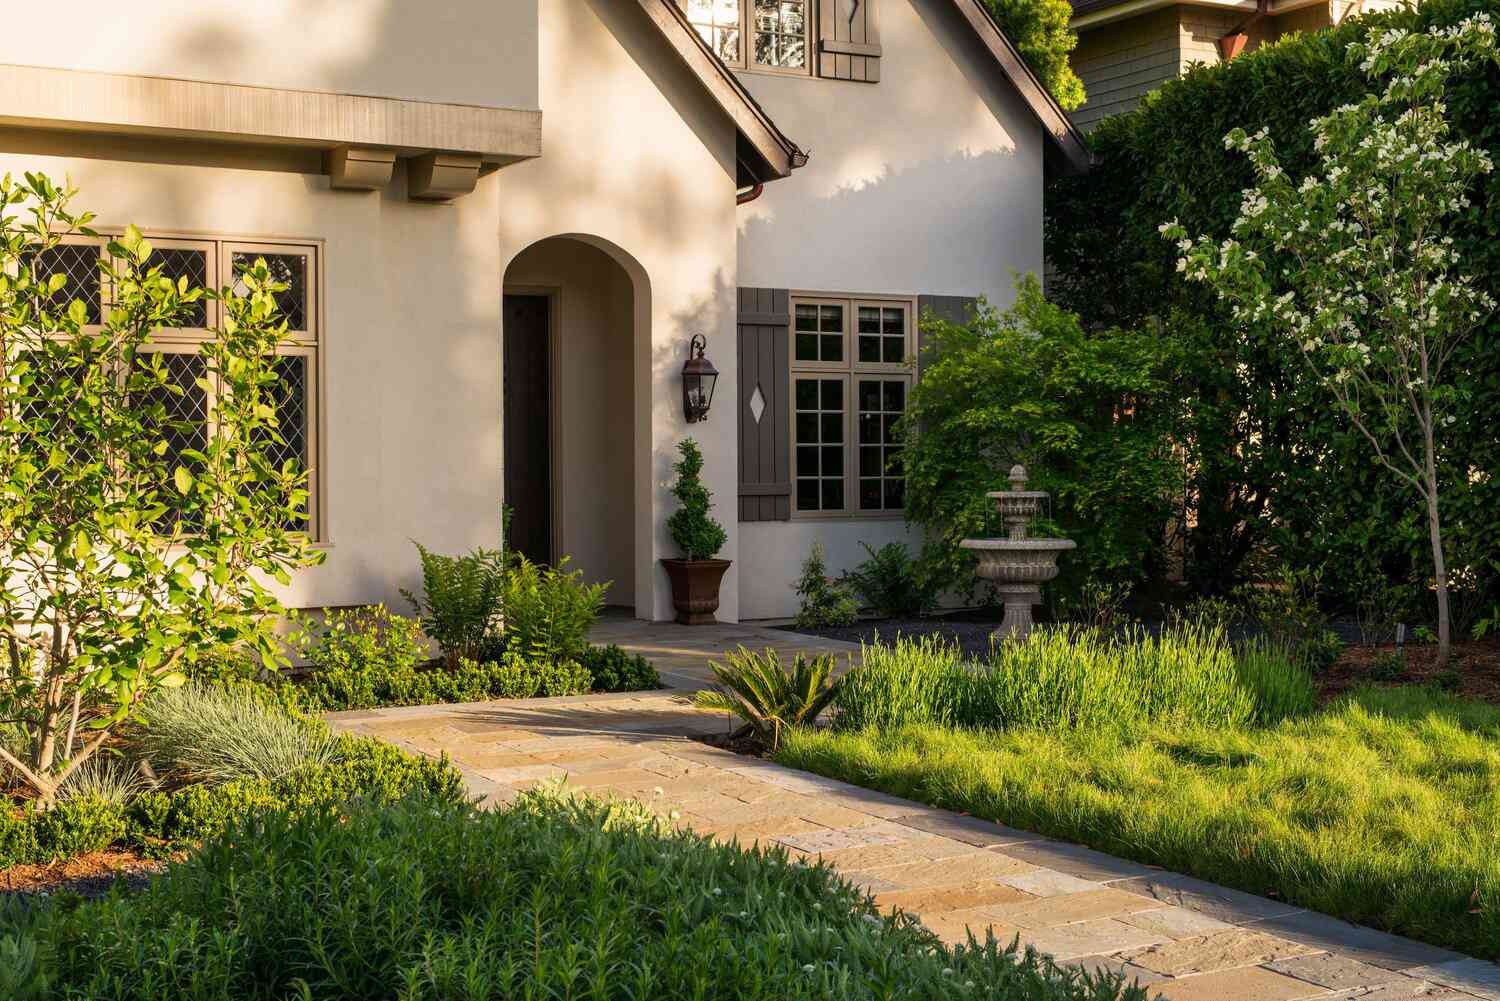 Landscaping Ideas for Small Front Yards